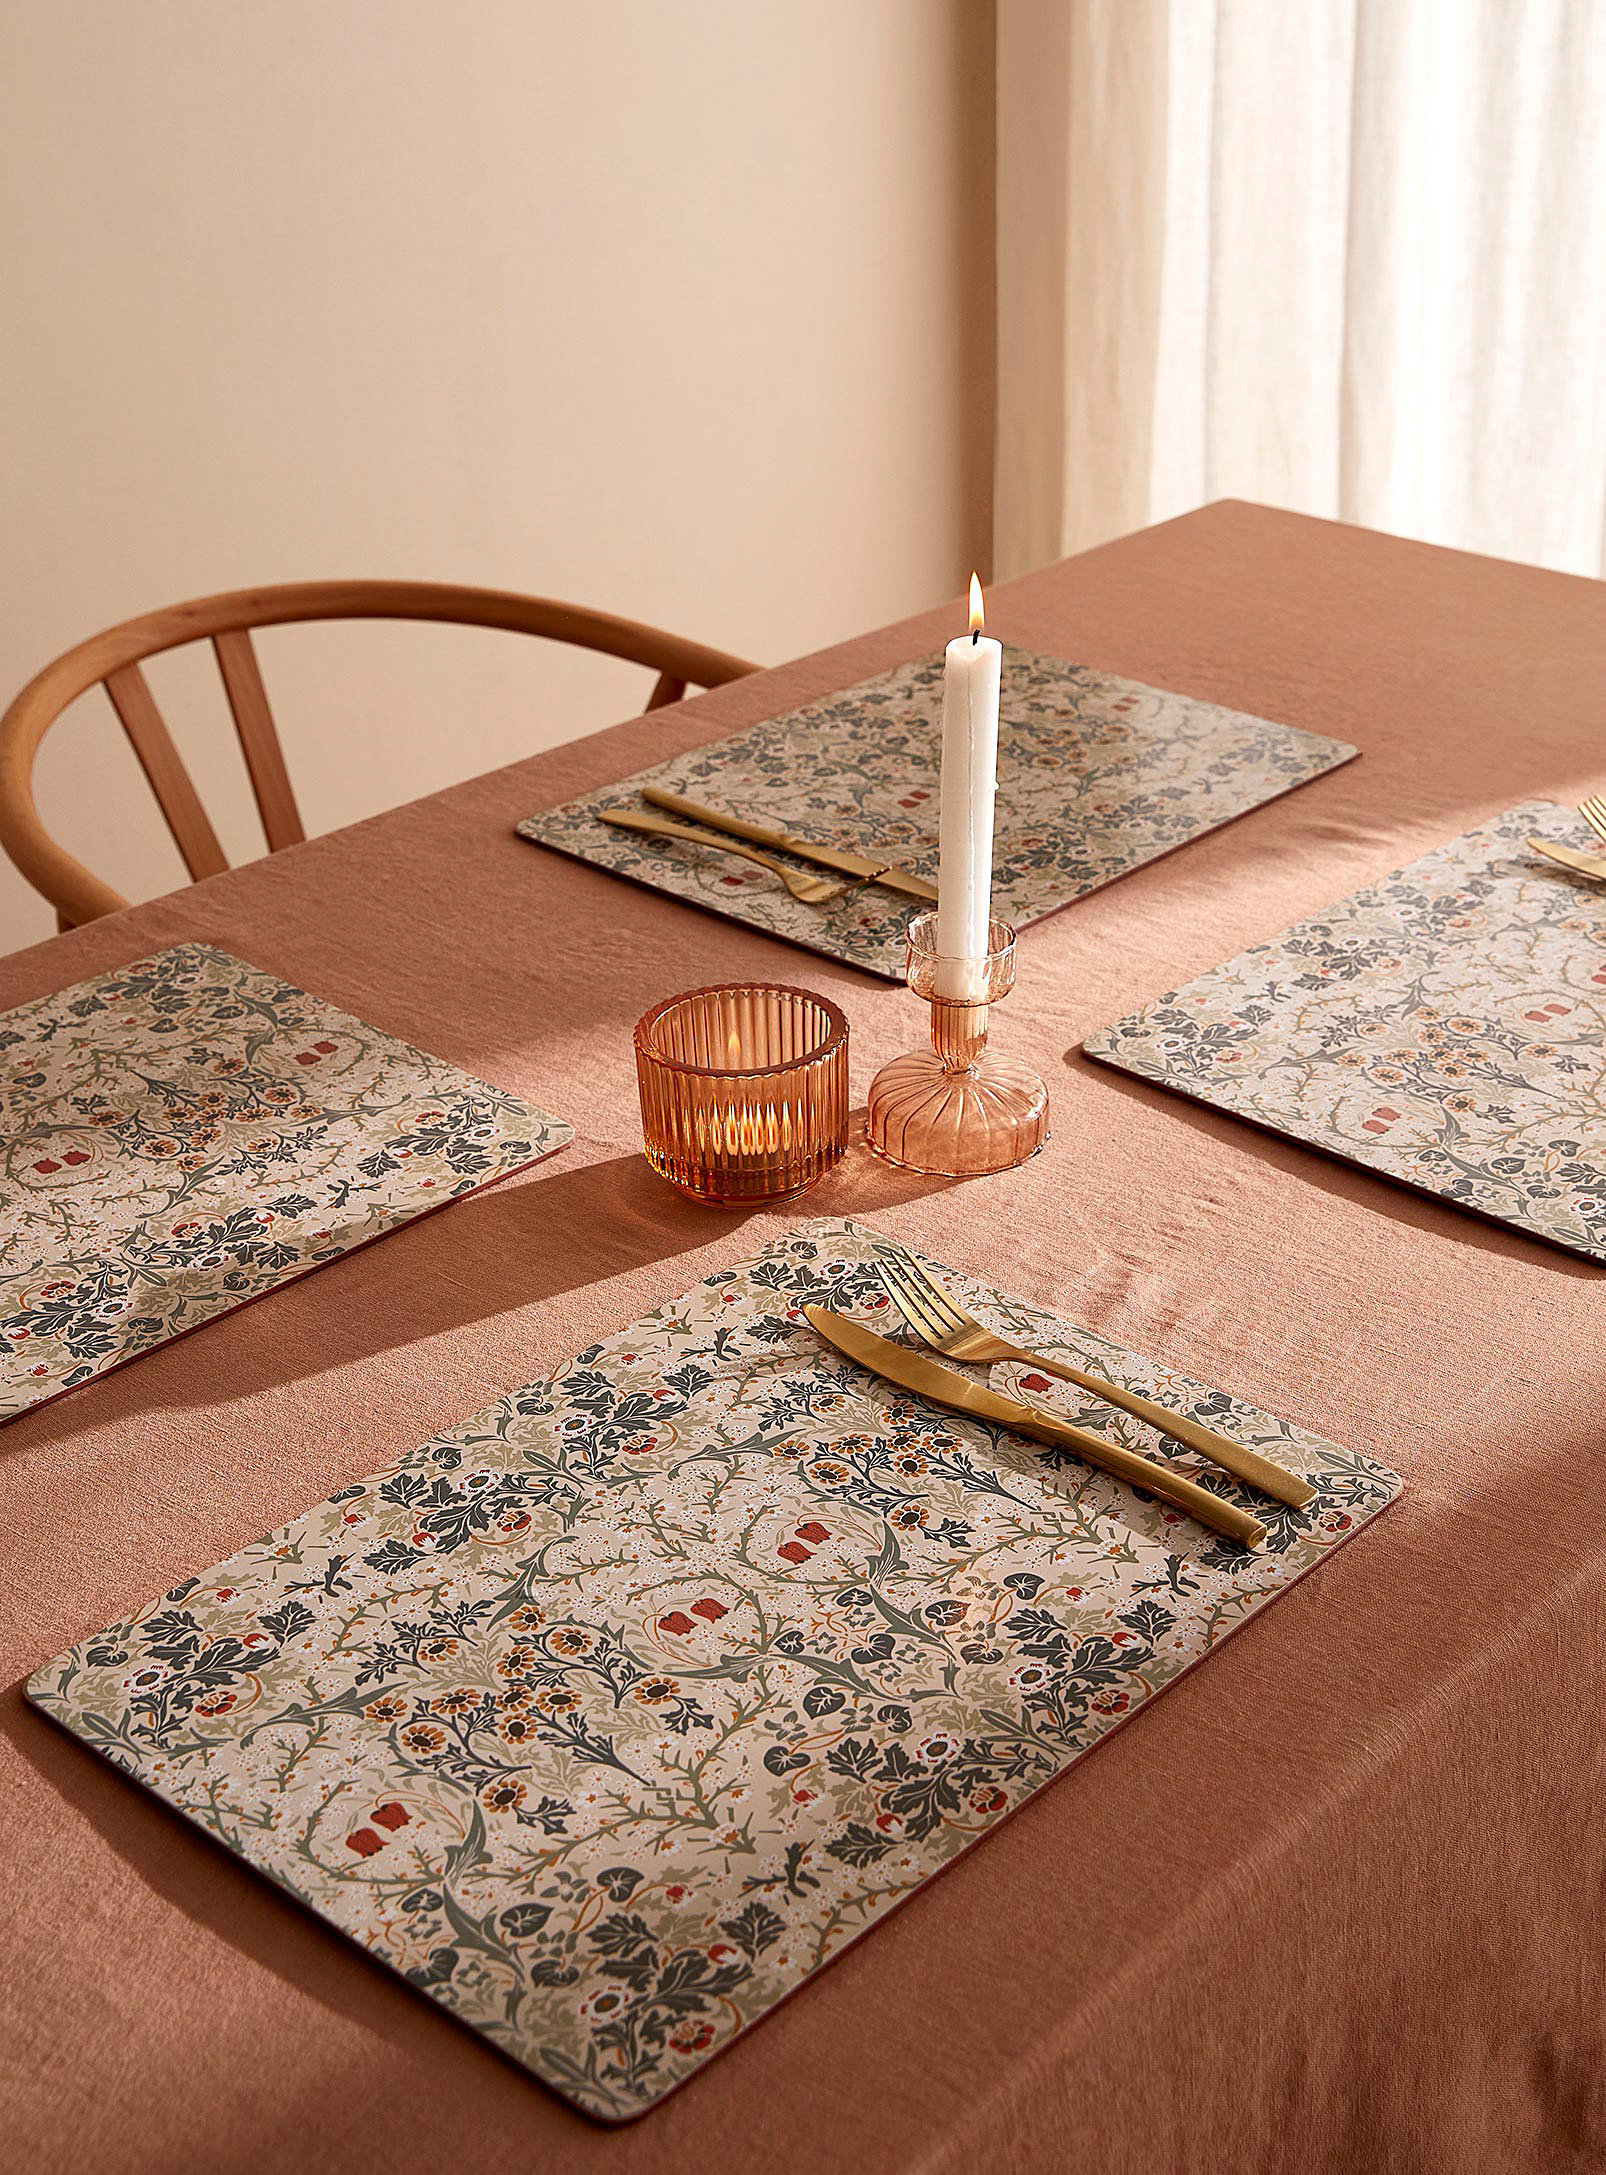 Simons Maison - Flowers of yesteryear laminated cork placemats Set of 4